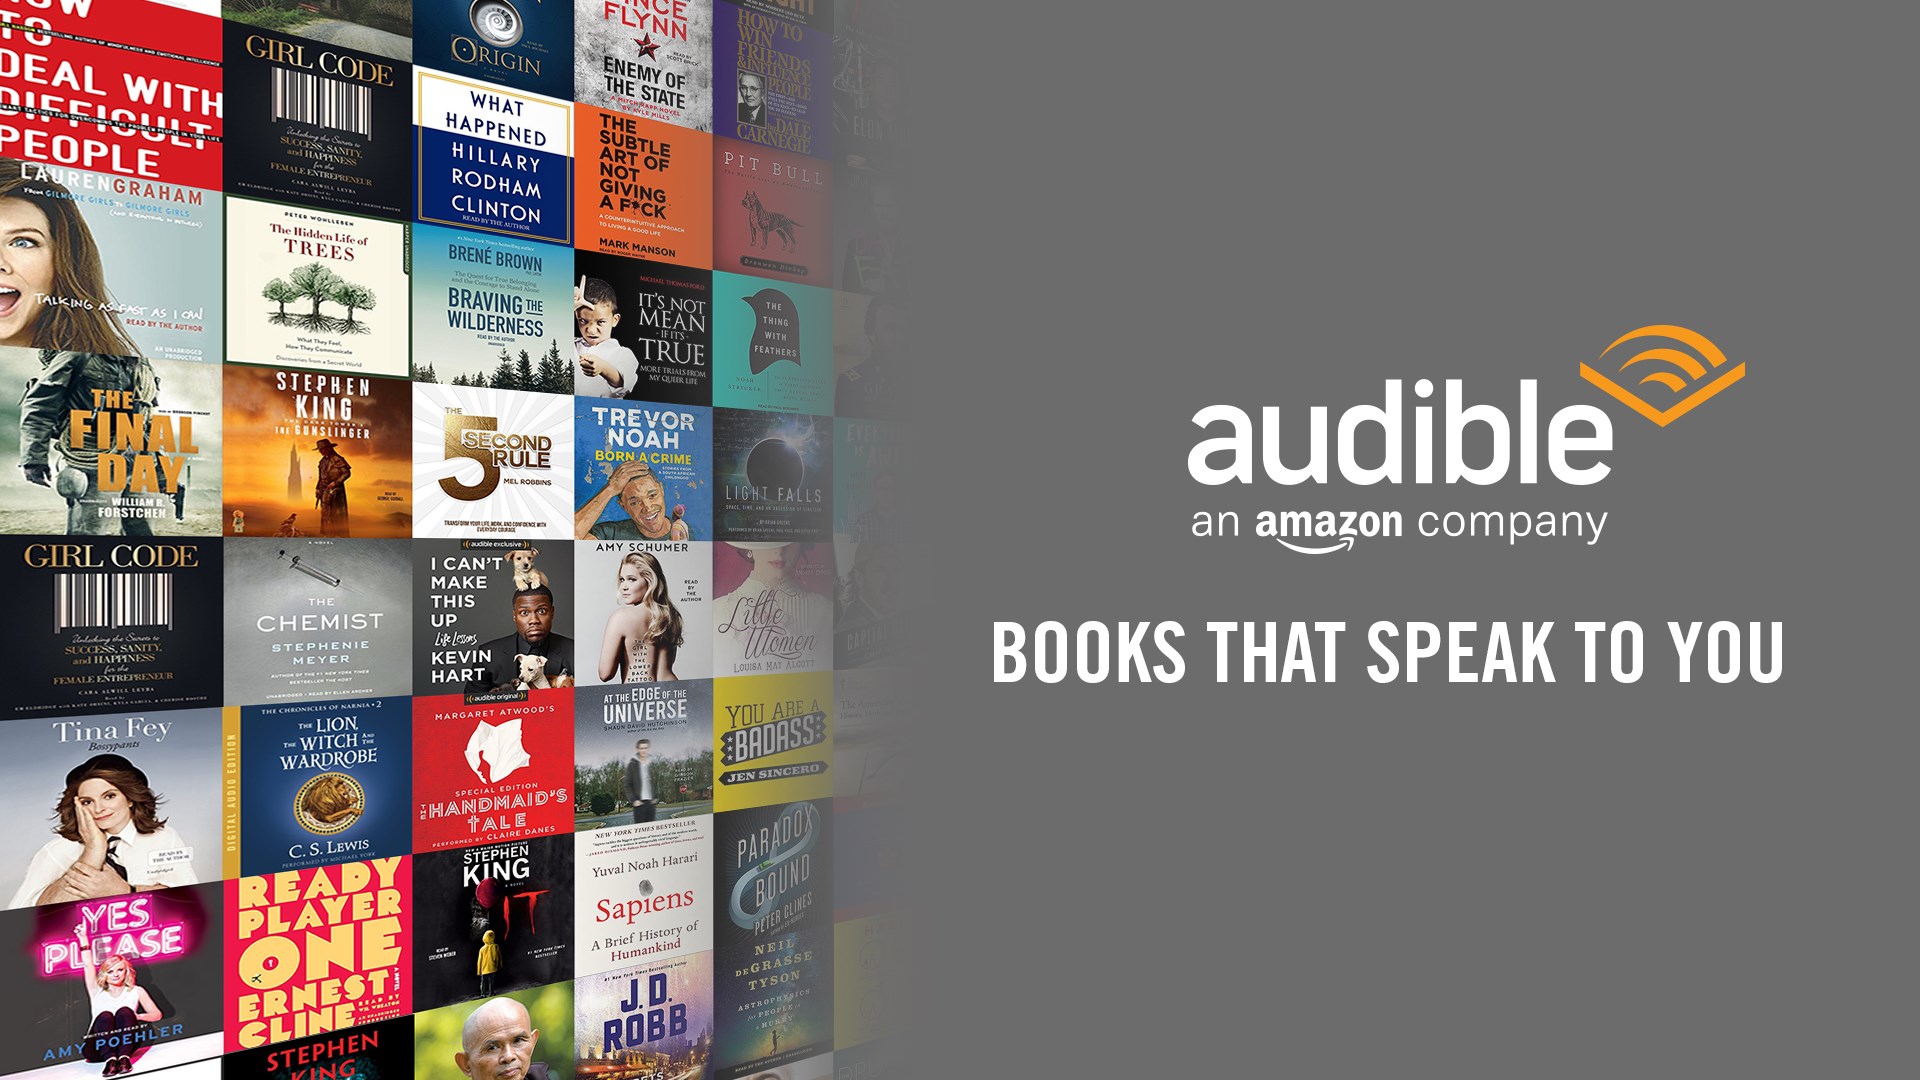 Why is Audible so popular?